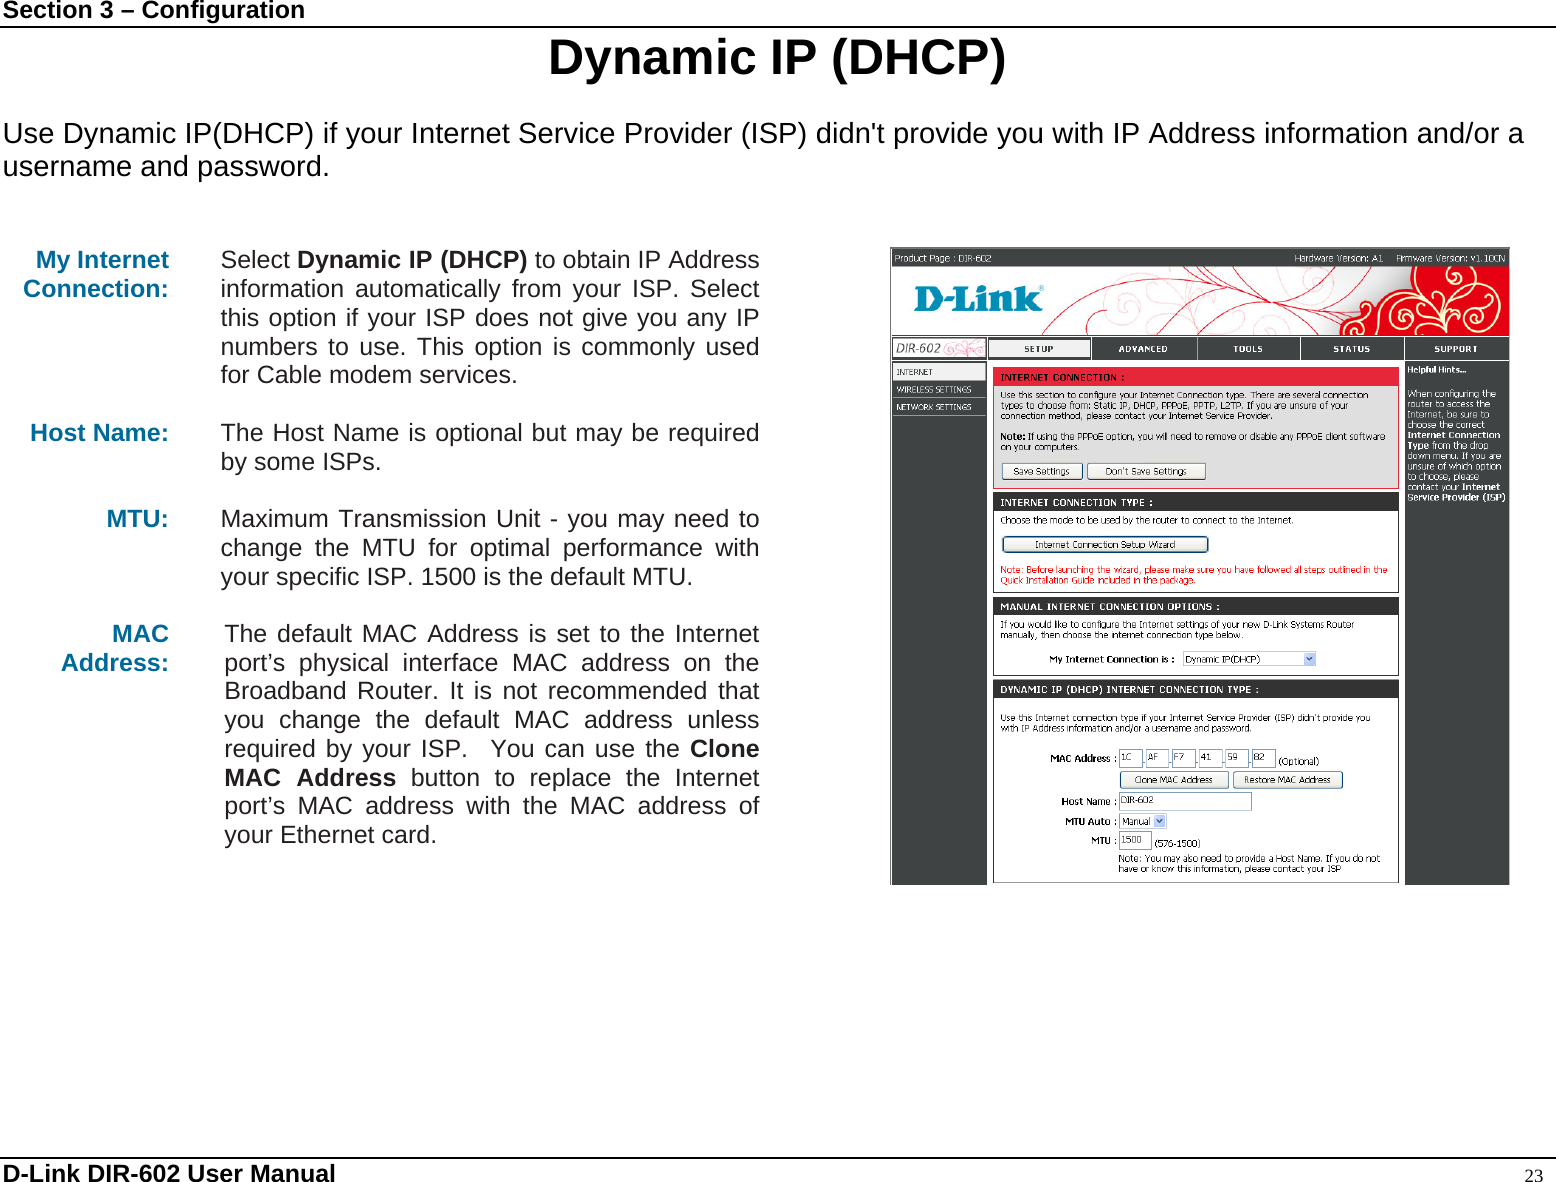 Section 3 – Configuration  Dynamic IP (DHCP)  Use Dynamic IP(DHCP) if your Internet Service Provider (ISP) didn&apos;t provide you with IP Address information and/or a username and password.   My Internet Connection:  Select Dynamic IP (DHCP) to obtain IP Address information automatically from your ISP. Select this option if your ISP does not give you any IP numbers to use. This option is commonly used for Cable modem services.  Host Name:  The Host Name is optional but may be required by some ISPs.    MTU:  Maximum Transmission Unit - you may need to change the MTU for optimal performance with your specific ISP. 1500 is the default MTU.  MAC Address:   The default MAC Address is set to the Internet port’s physical interface MAC address on the Broadband Router. It is not recommended that you change the default MAC address unless required by your ISP.  You can use the Clone MAC Address button to replace the Internet port’s MAC address with the MAC address of your Ethernet card.    D-Link DIR-602 User Manual                                                                                               23 